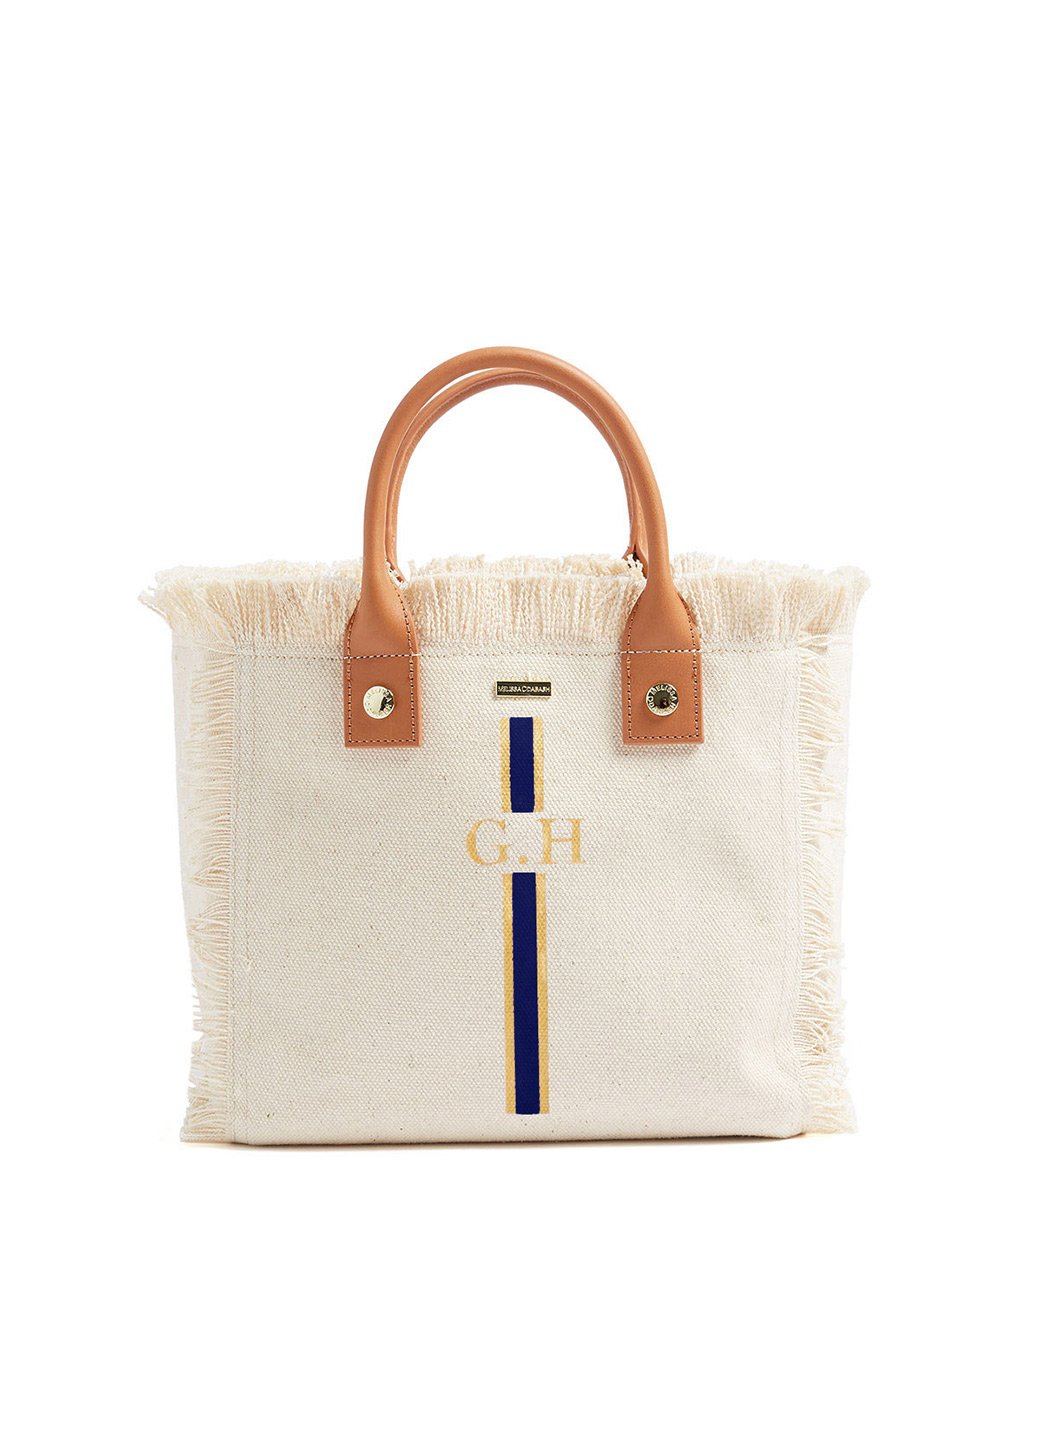 Porto Cervo Small Personalised Tote in Beige/Navy & Melissa Odabash